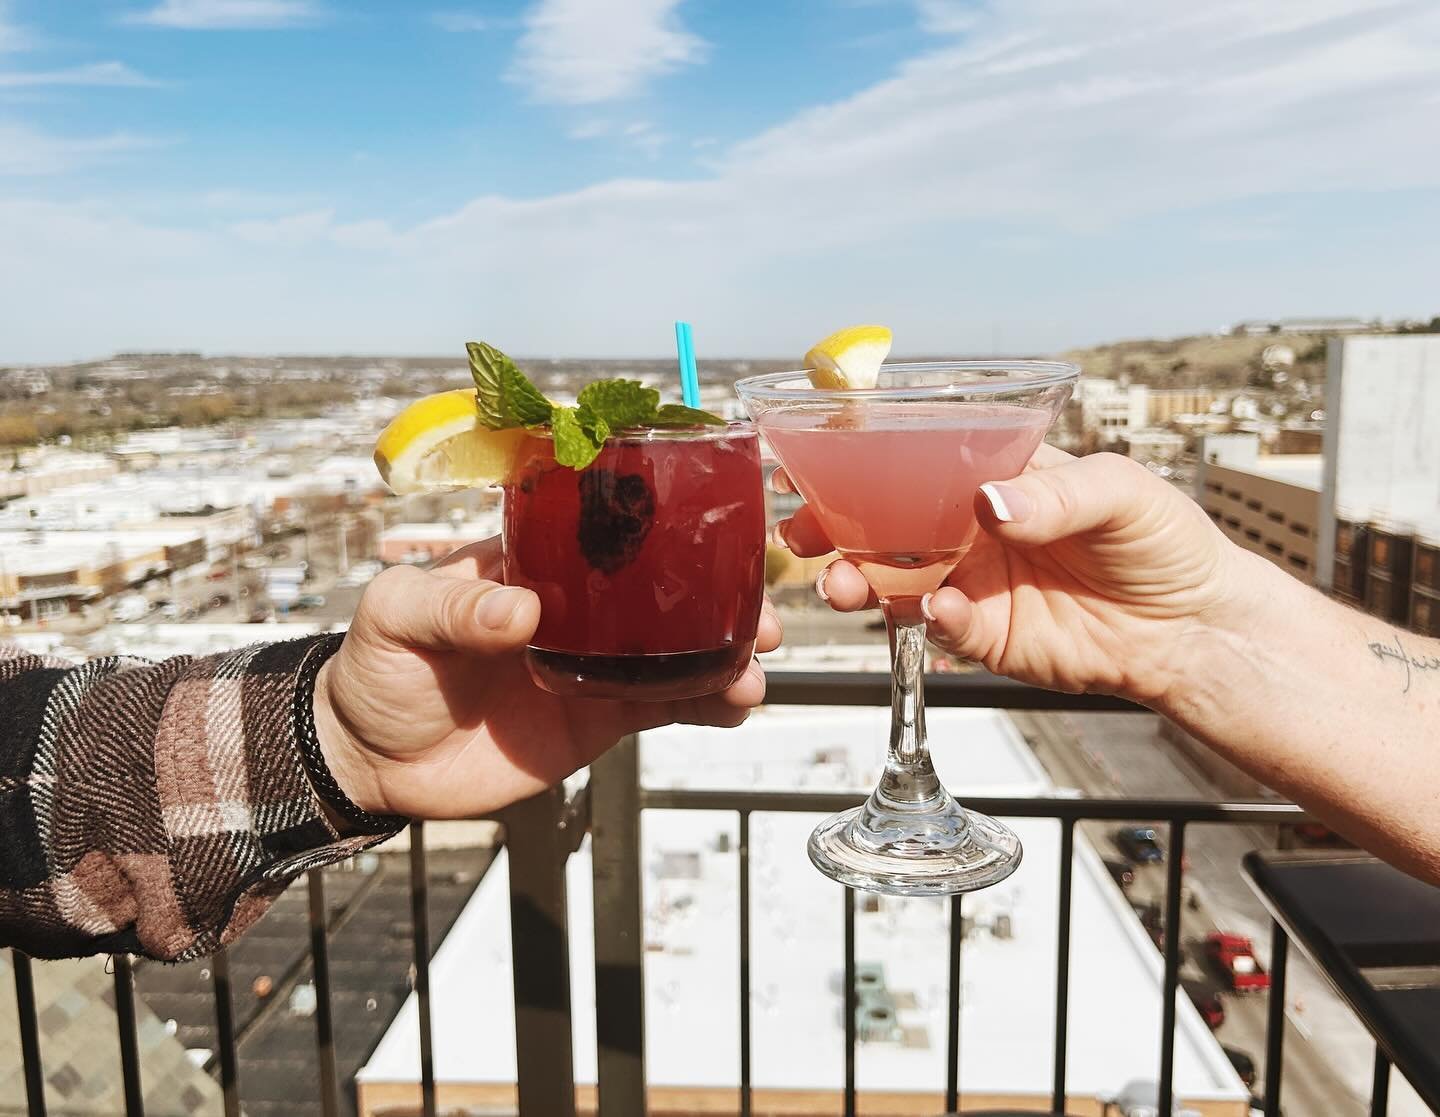 Cheers to the weekend! Sunshine in the forecast = the perfect opportunity for a cocktail at @vertexskybar ☀️🍹
#downtownrapidcity